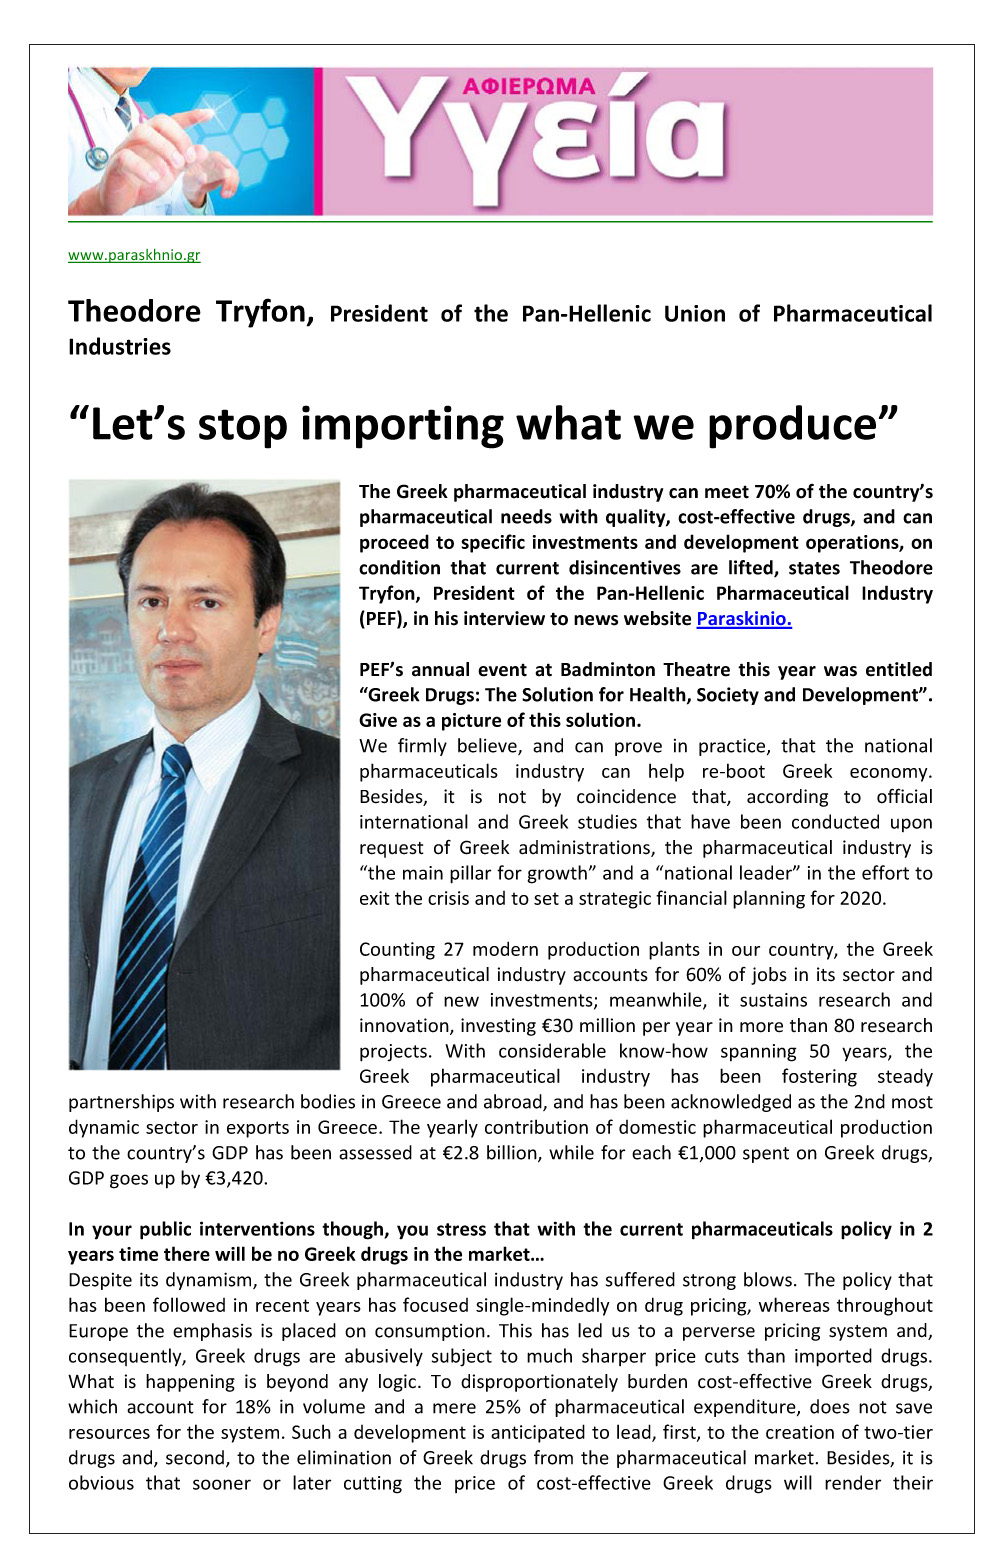 Theodore Tryfon, President of the Pan-Hellenic Union of Pharmaceutical Industries 